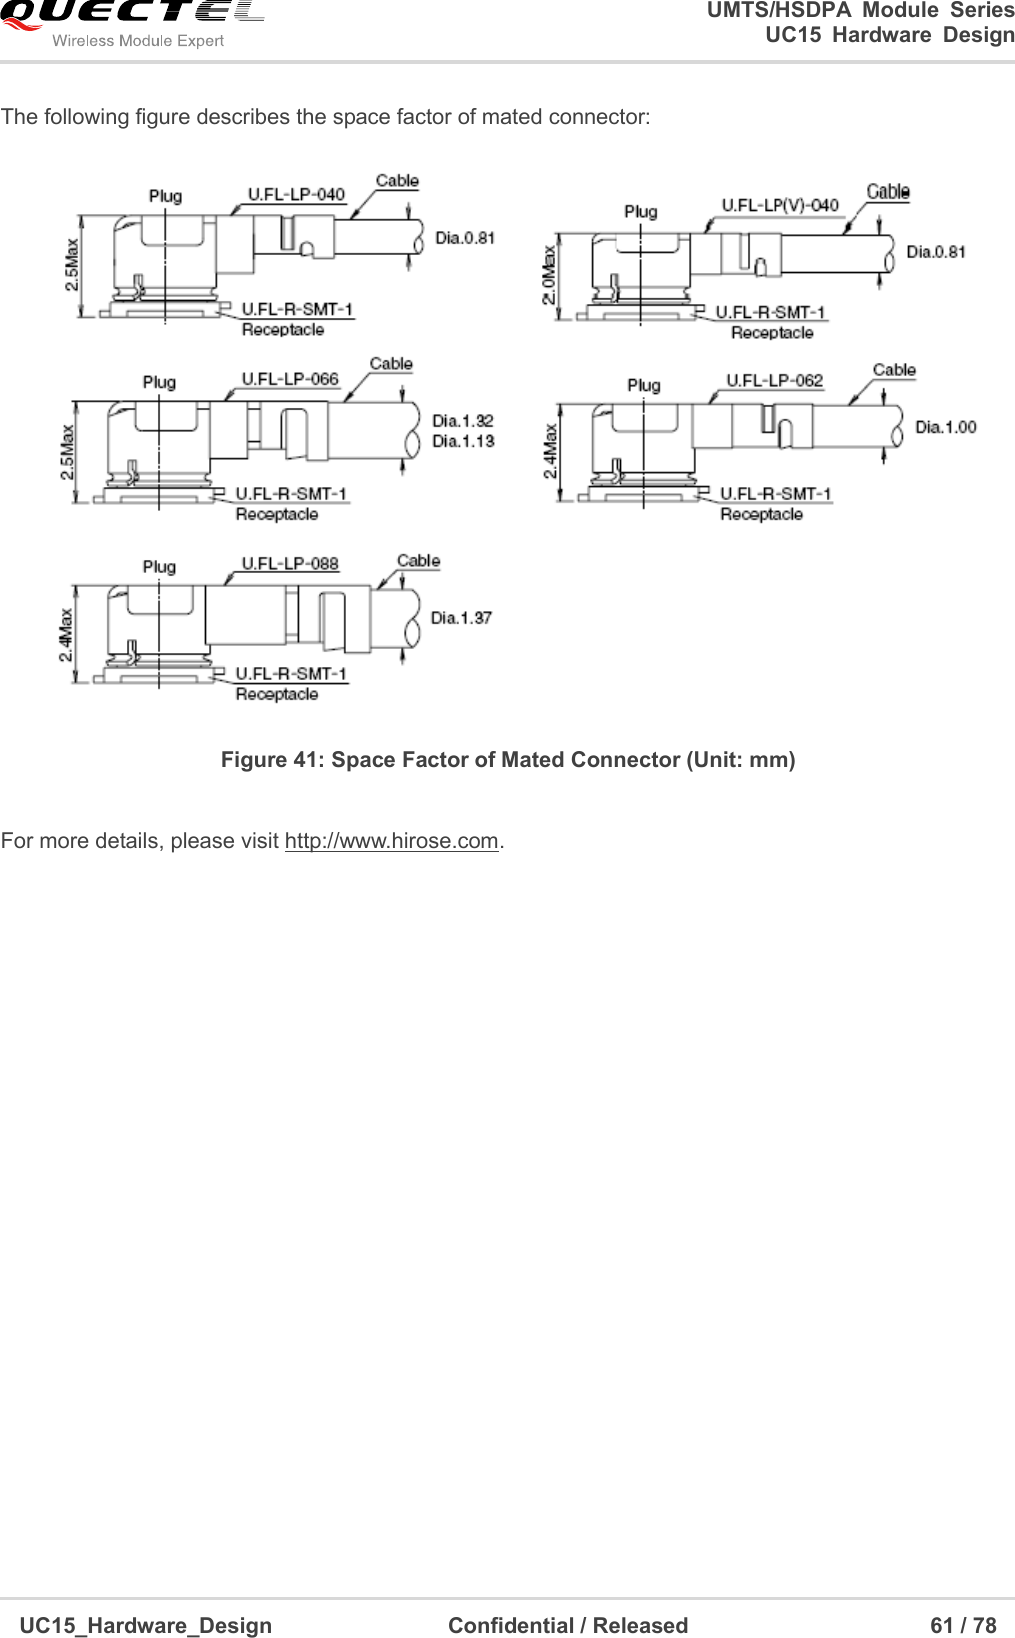                                                                        UMTS/HSDPA  Module  Series                                                                 UC15 Hardware Design  UC15_Hardware_Design                                Confidential / Released                                            61 / 78    The following figure describes the space factor of mated connector:  Figure 41: Space Factor of Mated Connector (Unit: mm)  For more details, please visit http://www.hirose.com. 